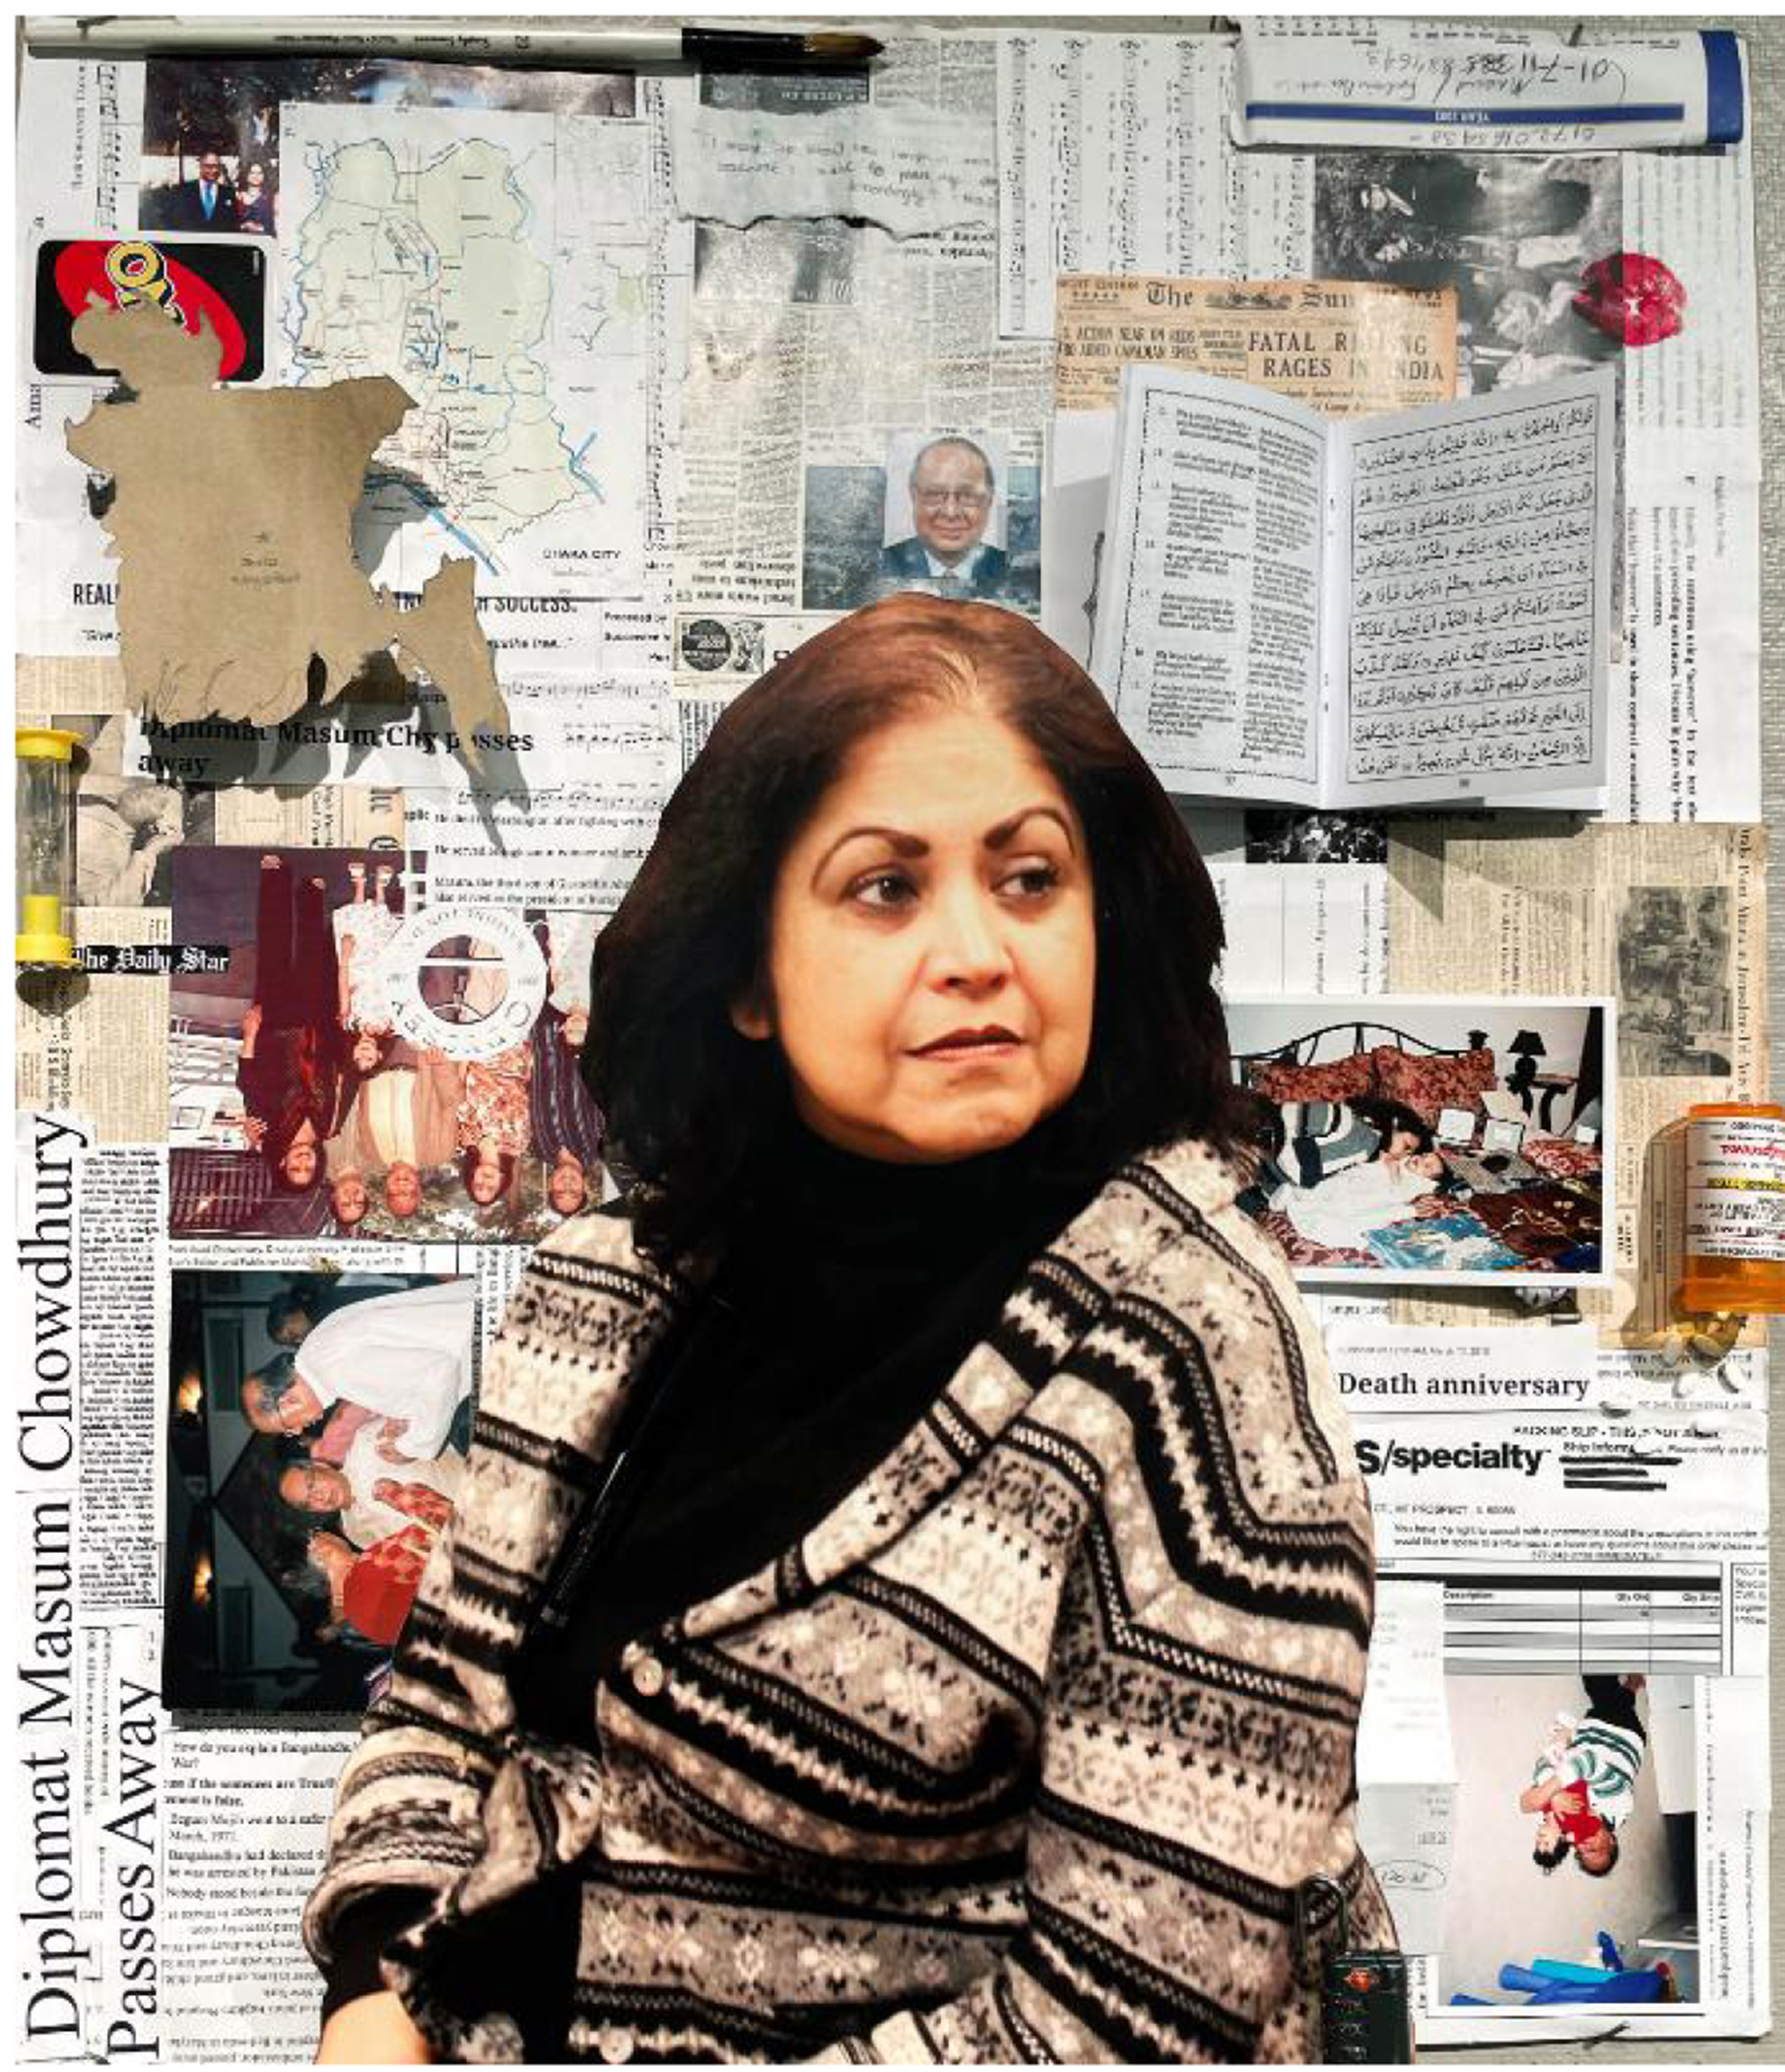 photo collage of a middle-aged woman against a background of documents and newspaper clippings